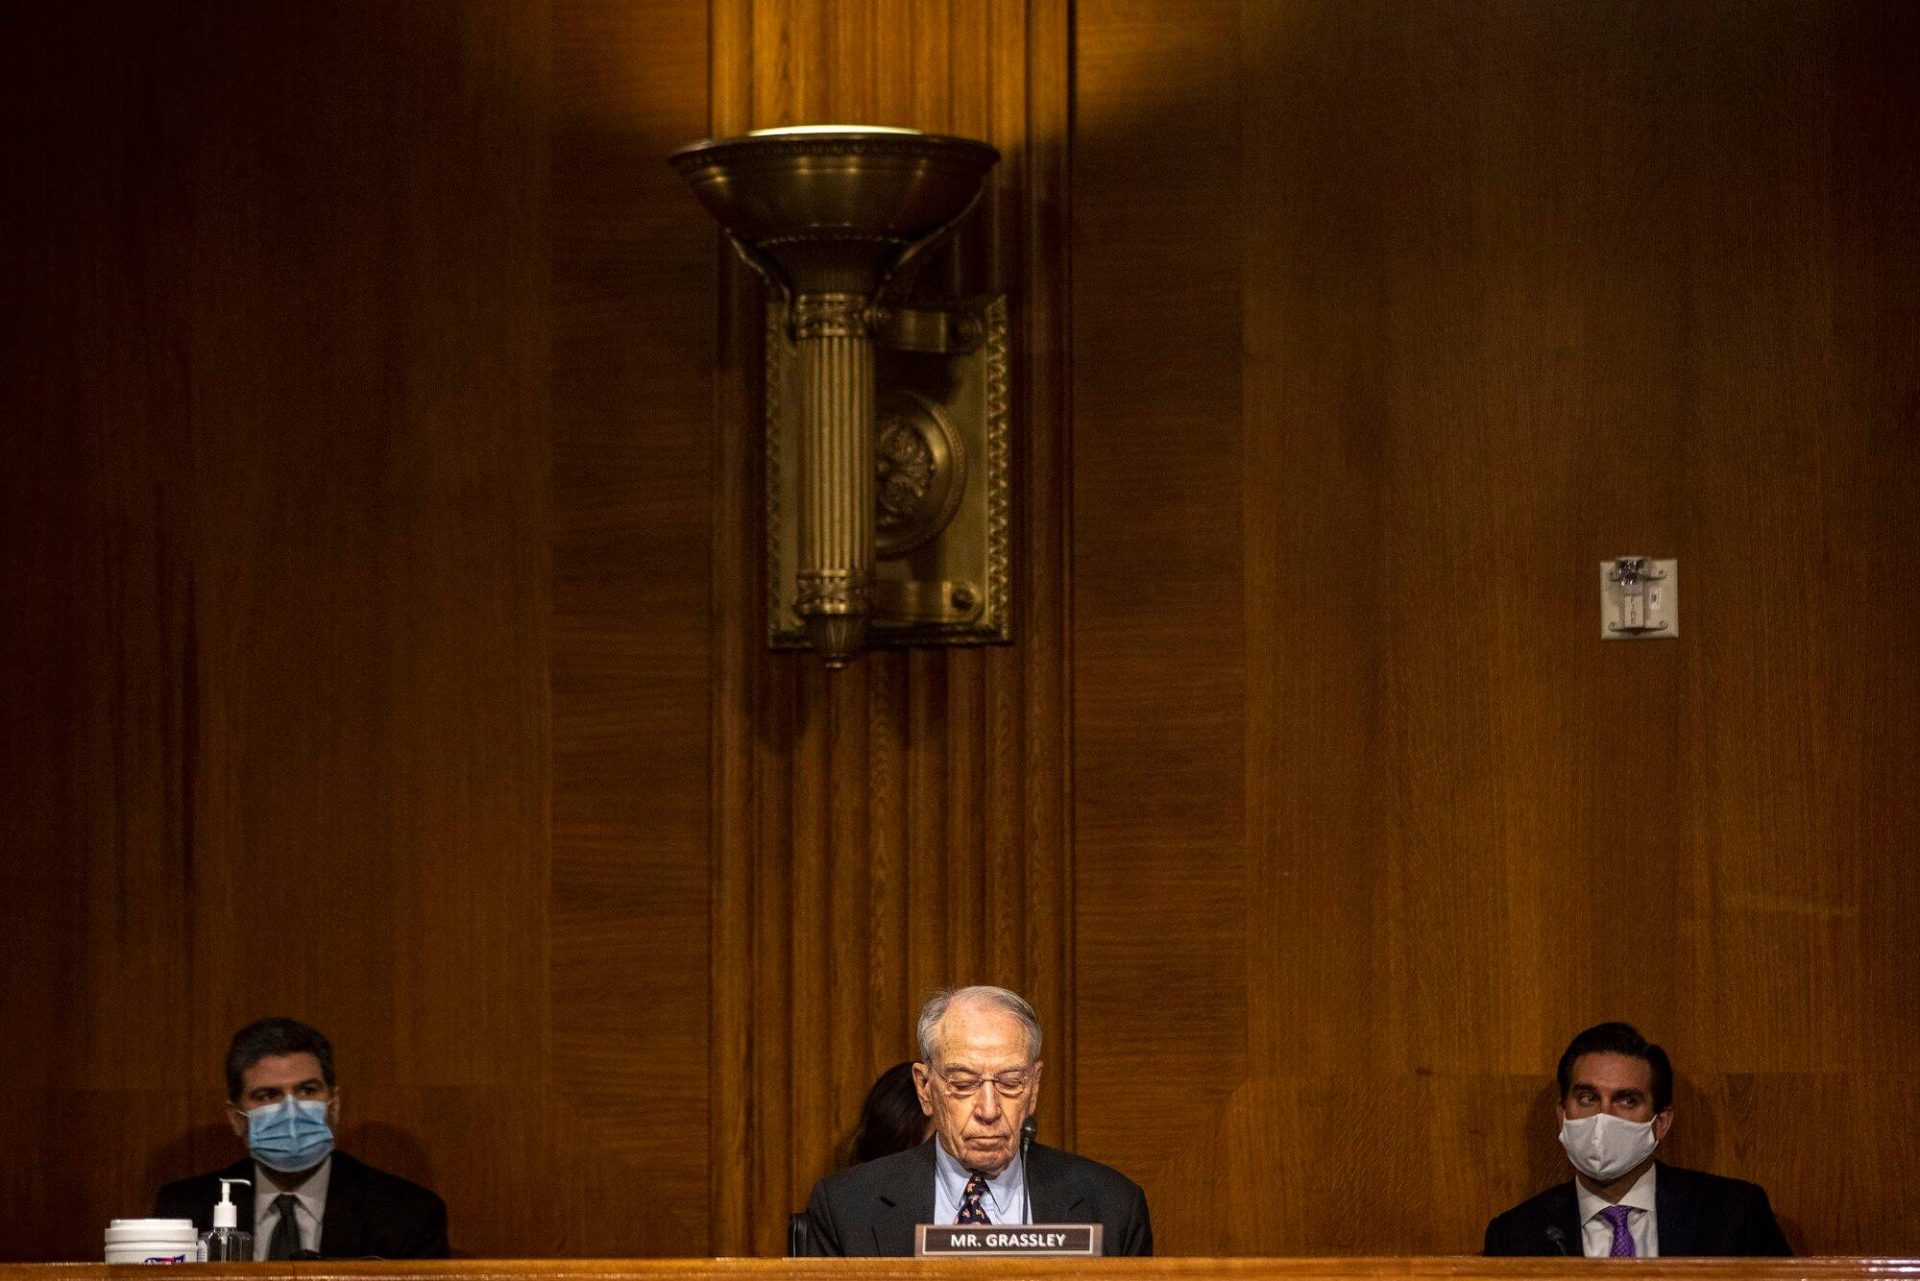 Chuck Grassley, the GOP Senator who’s third in line to the presidency, has COVID-19